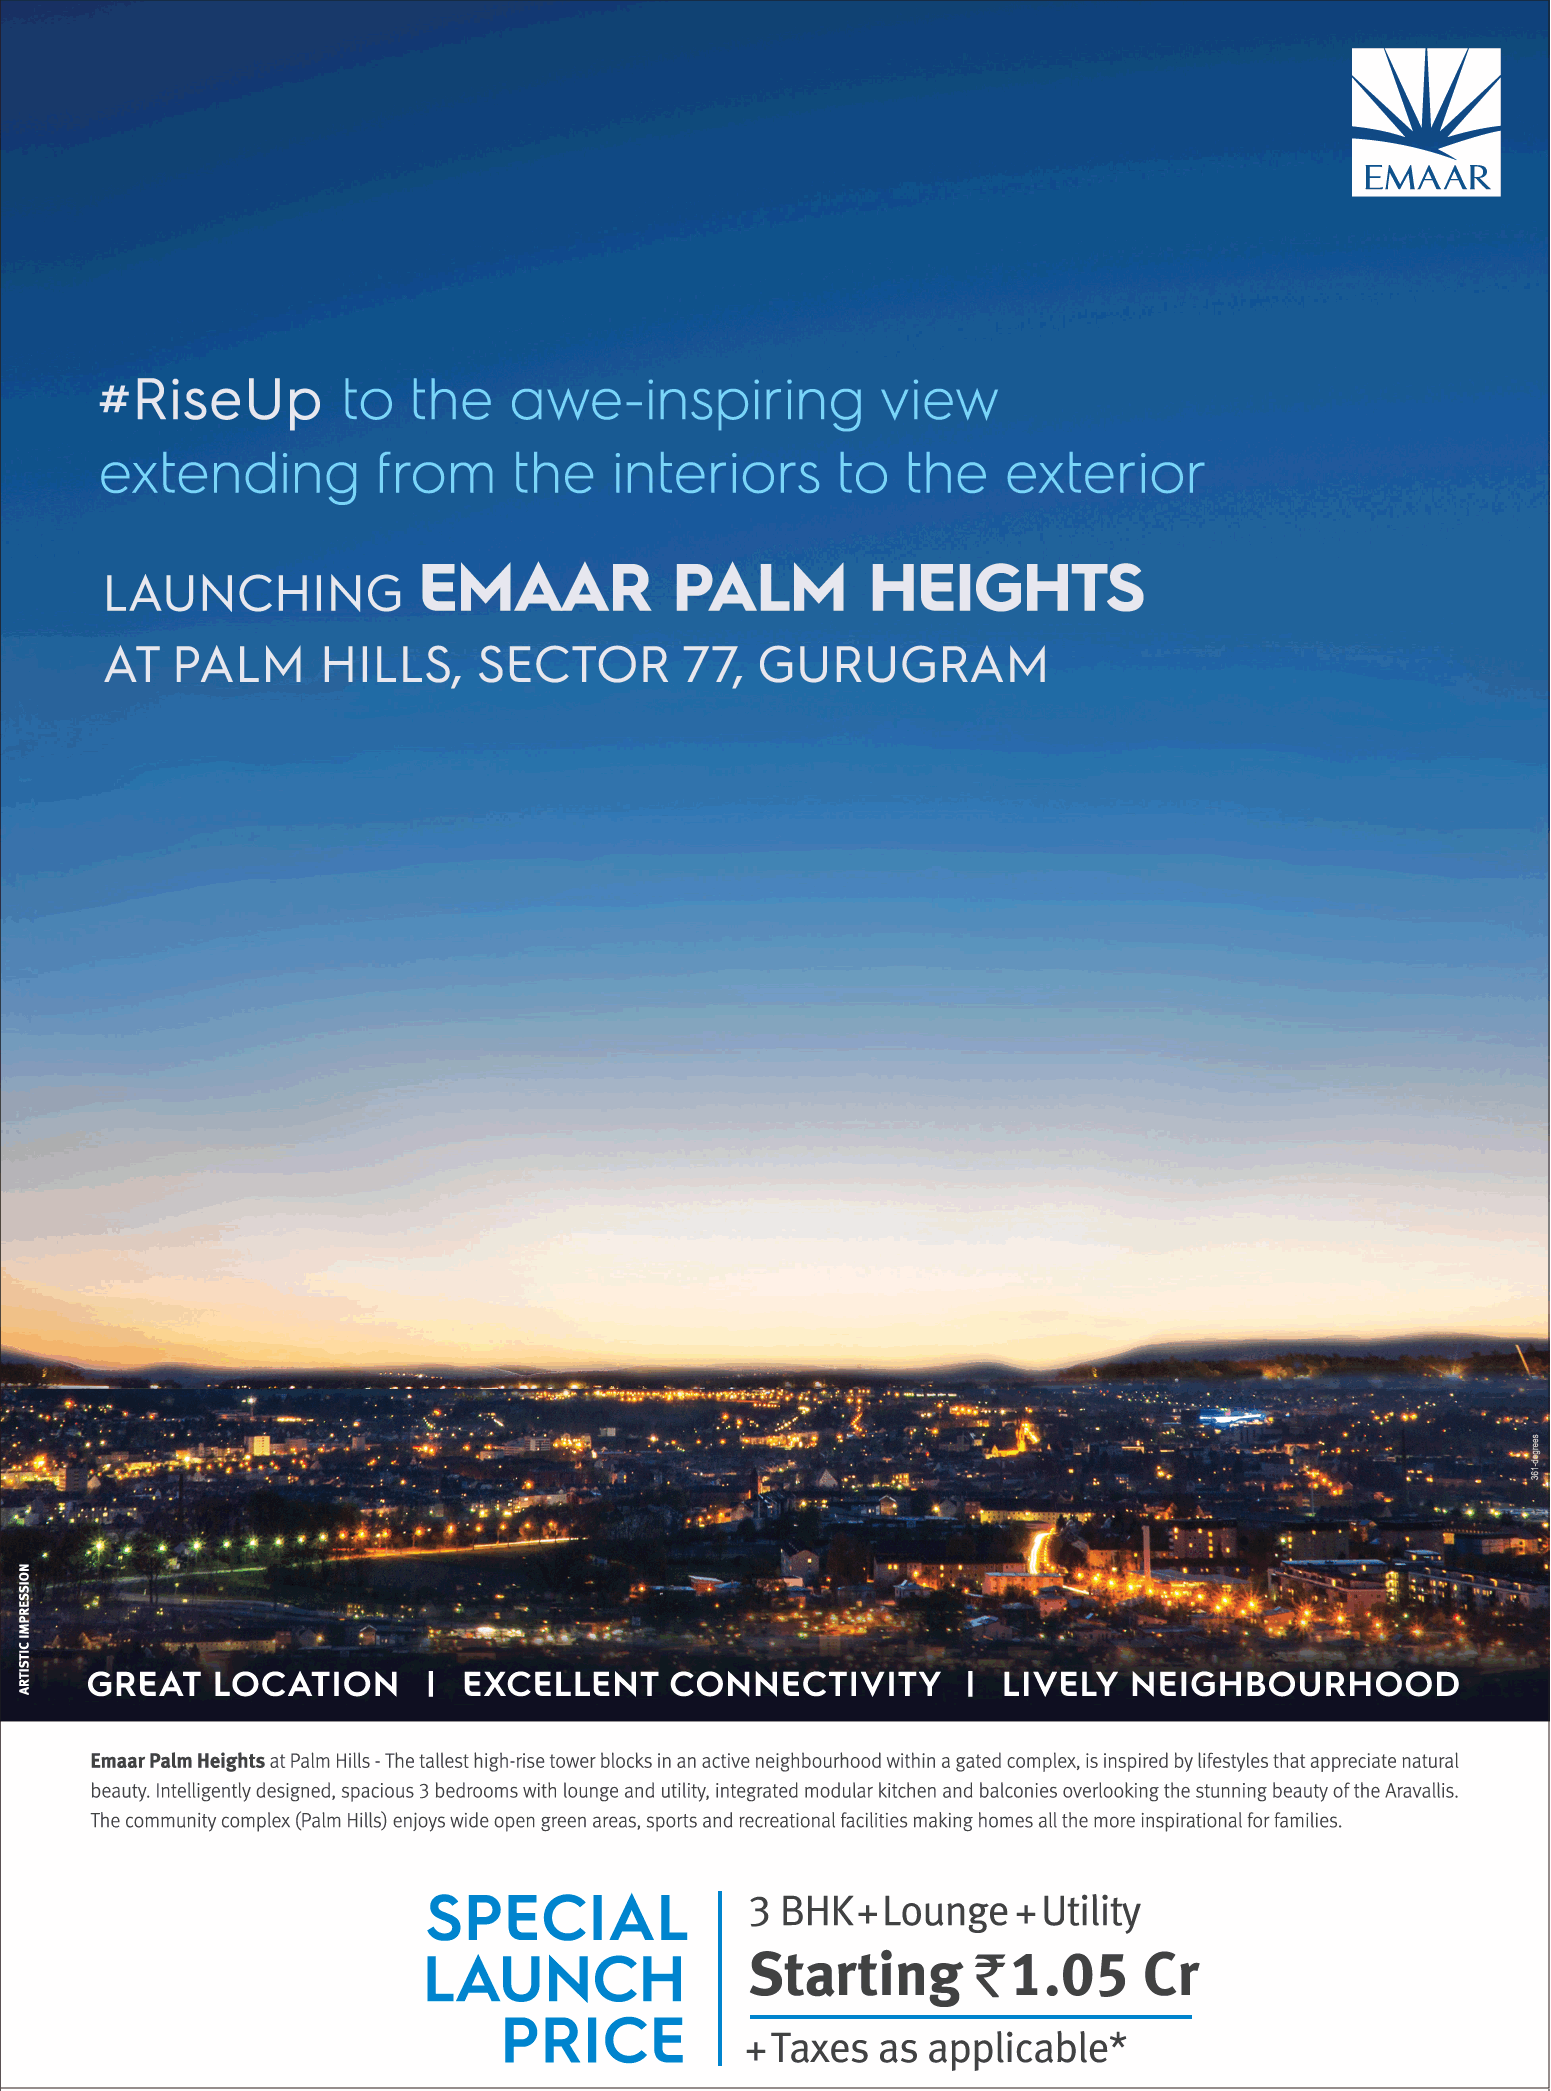 Special launch 3 bhk @ Rs 1.05 Cr. at Emaar Palm Heights in Gurgaon Update